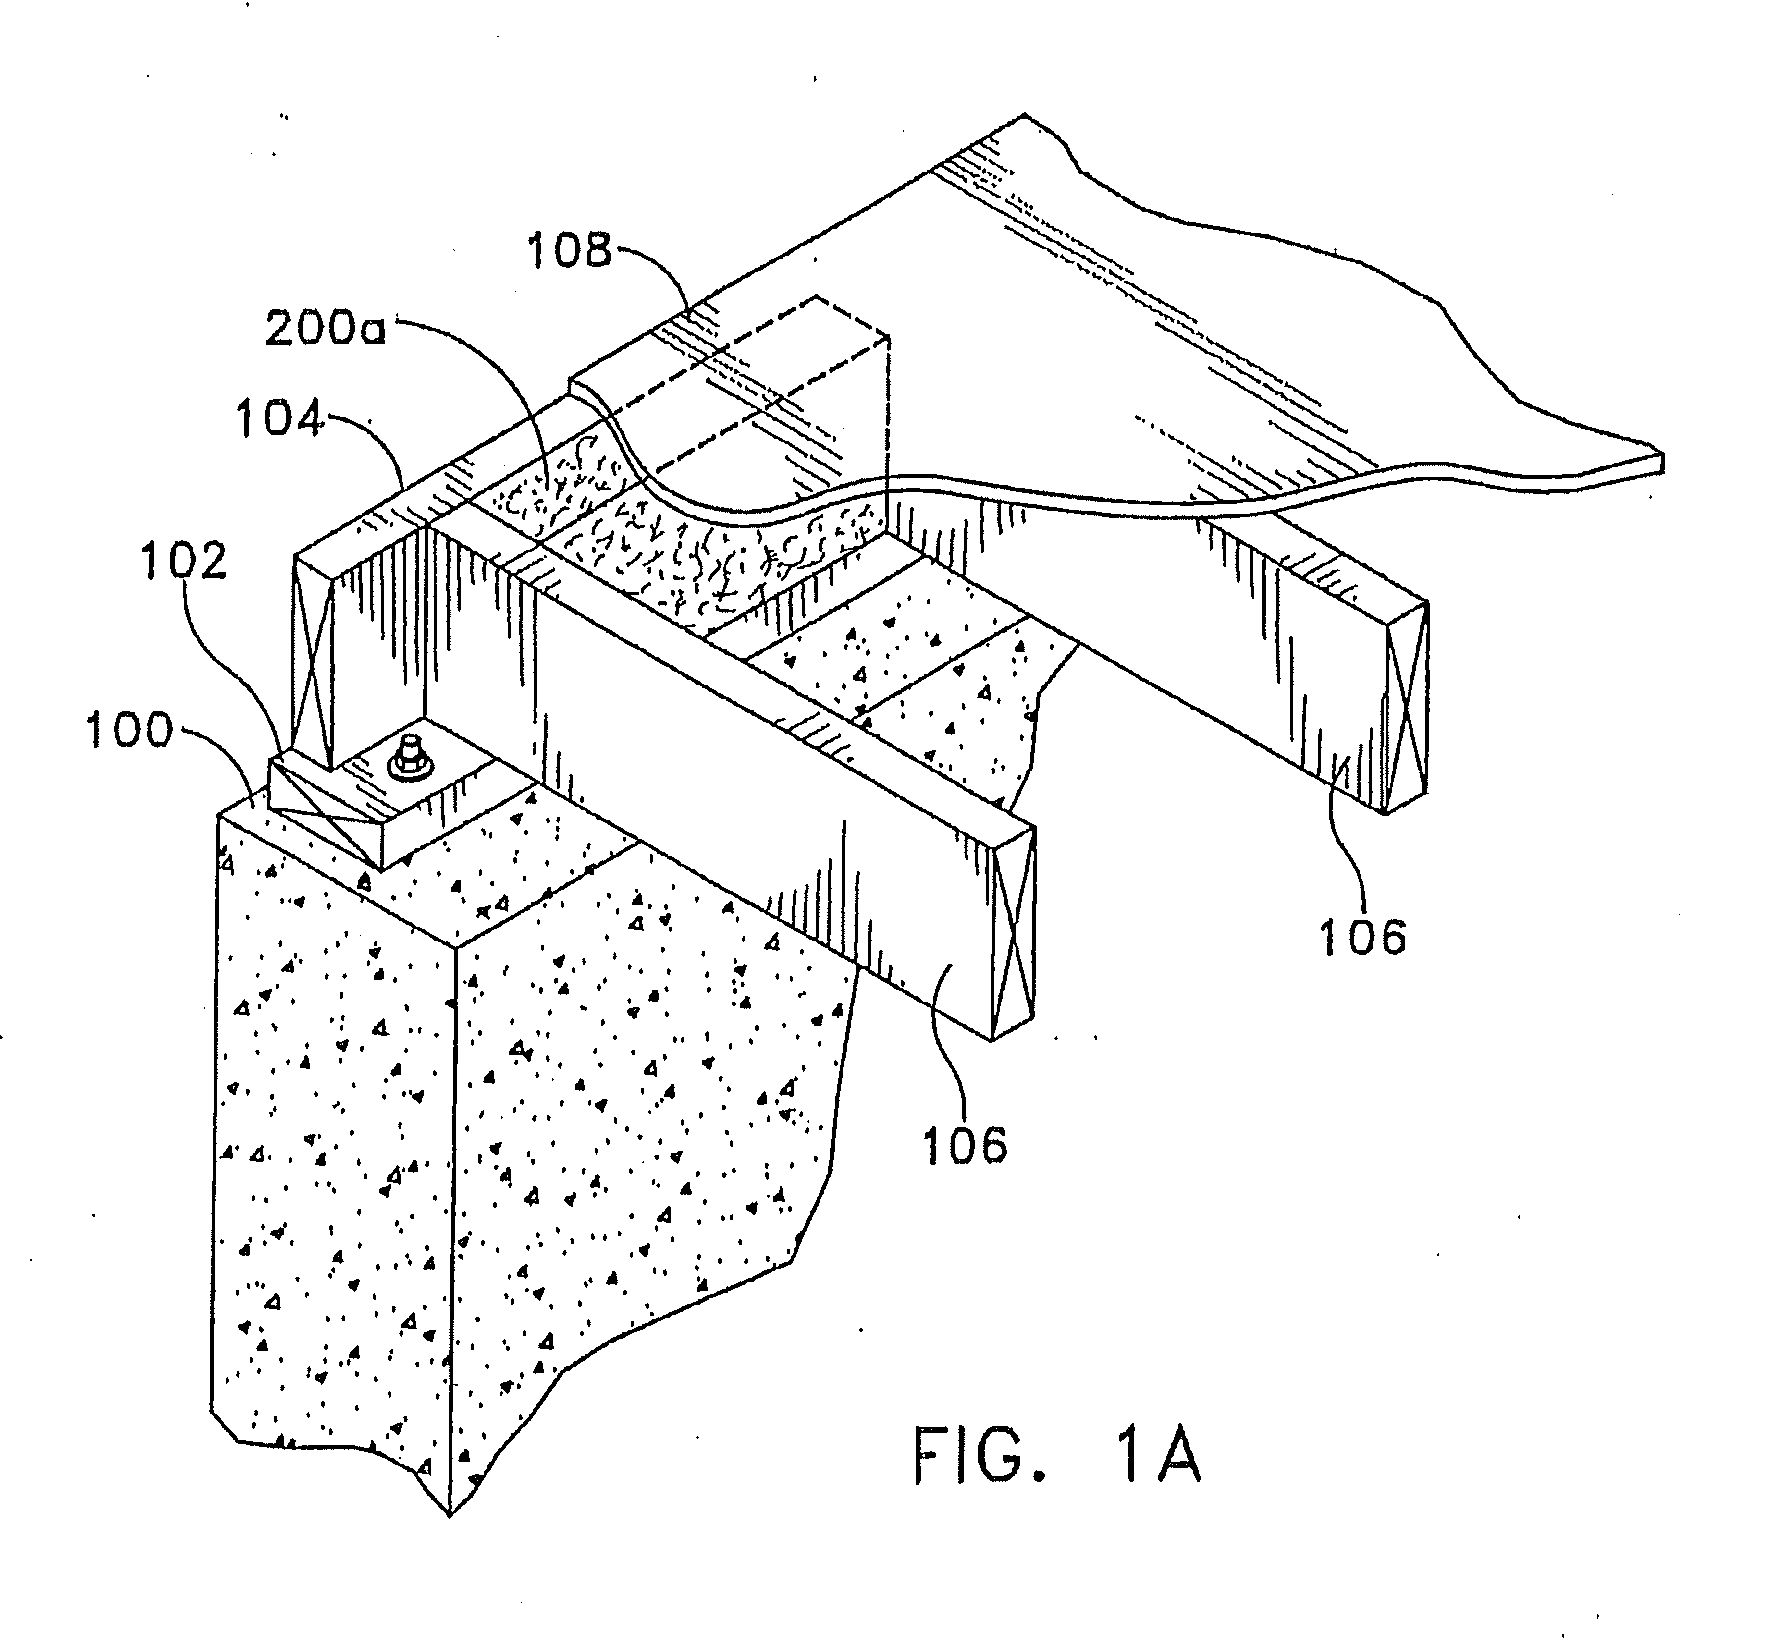 Segmented band joist batts and method of manufacture